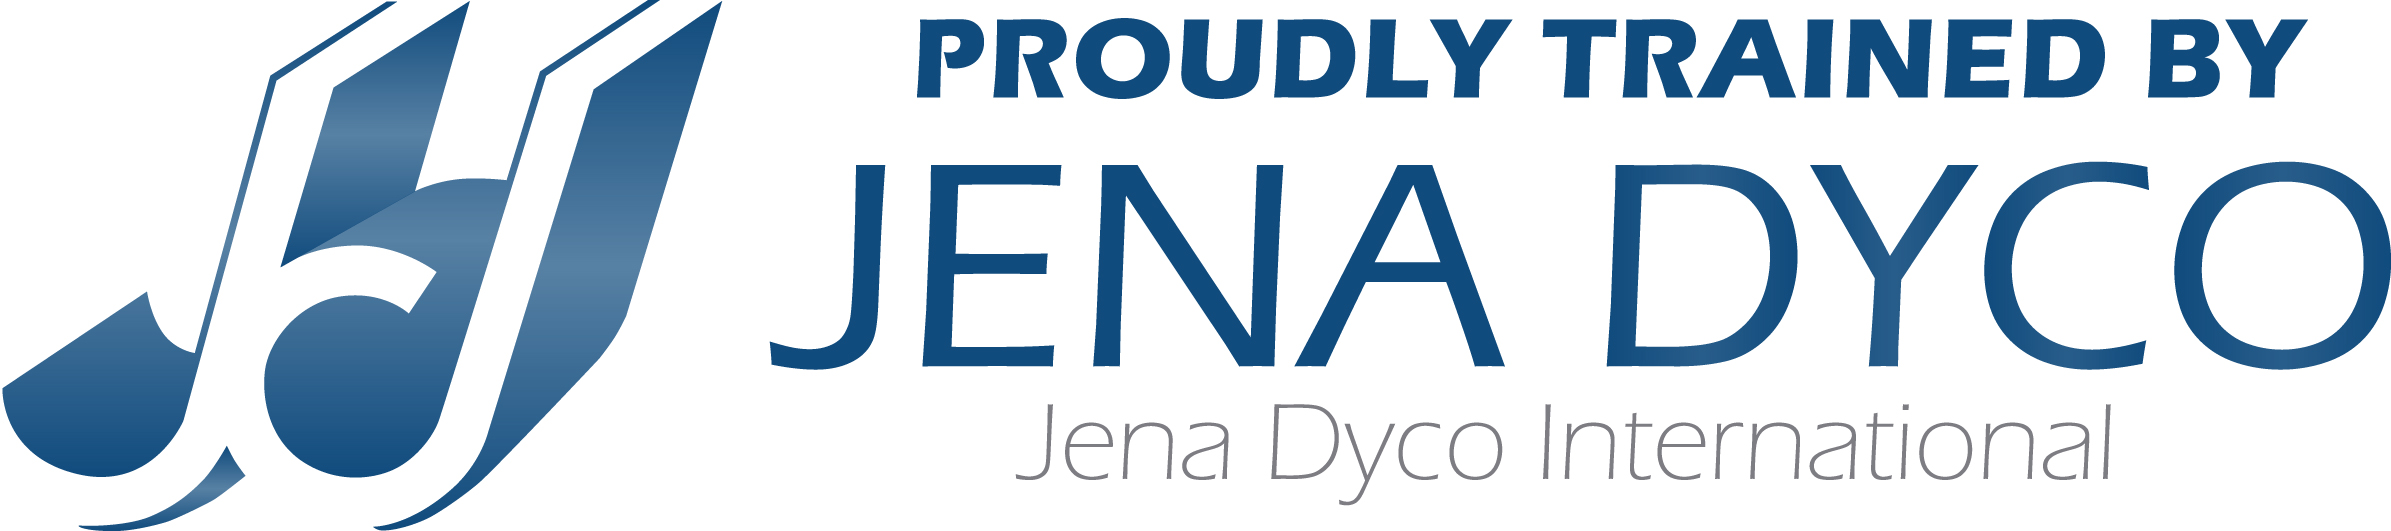 120328_Proudly Trained by Jena Dyco